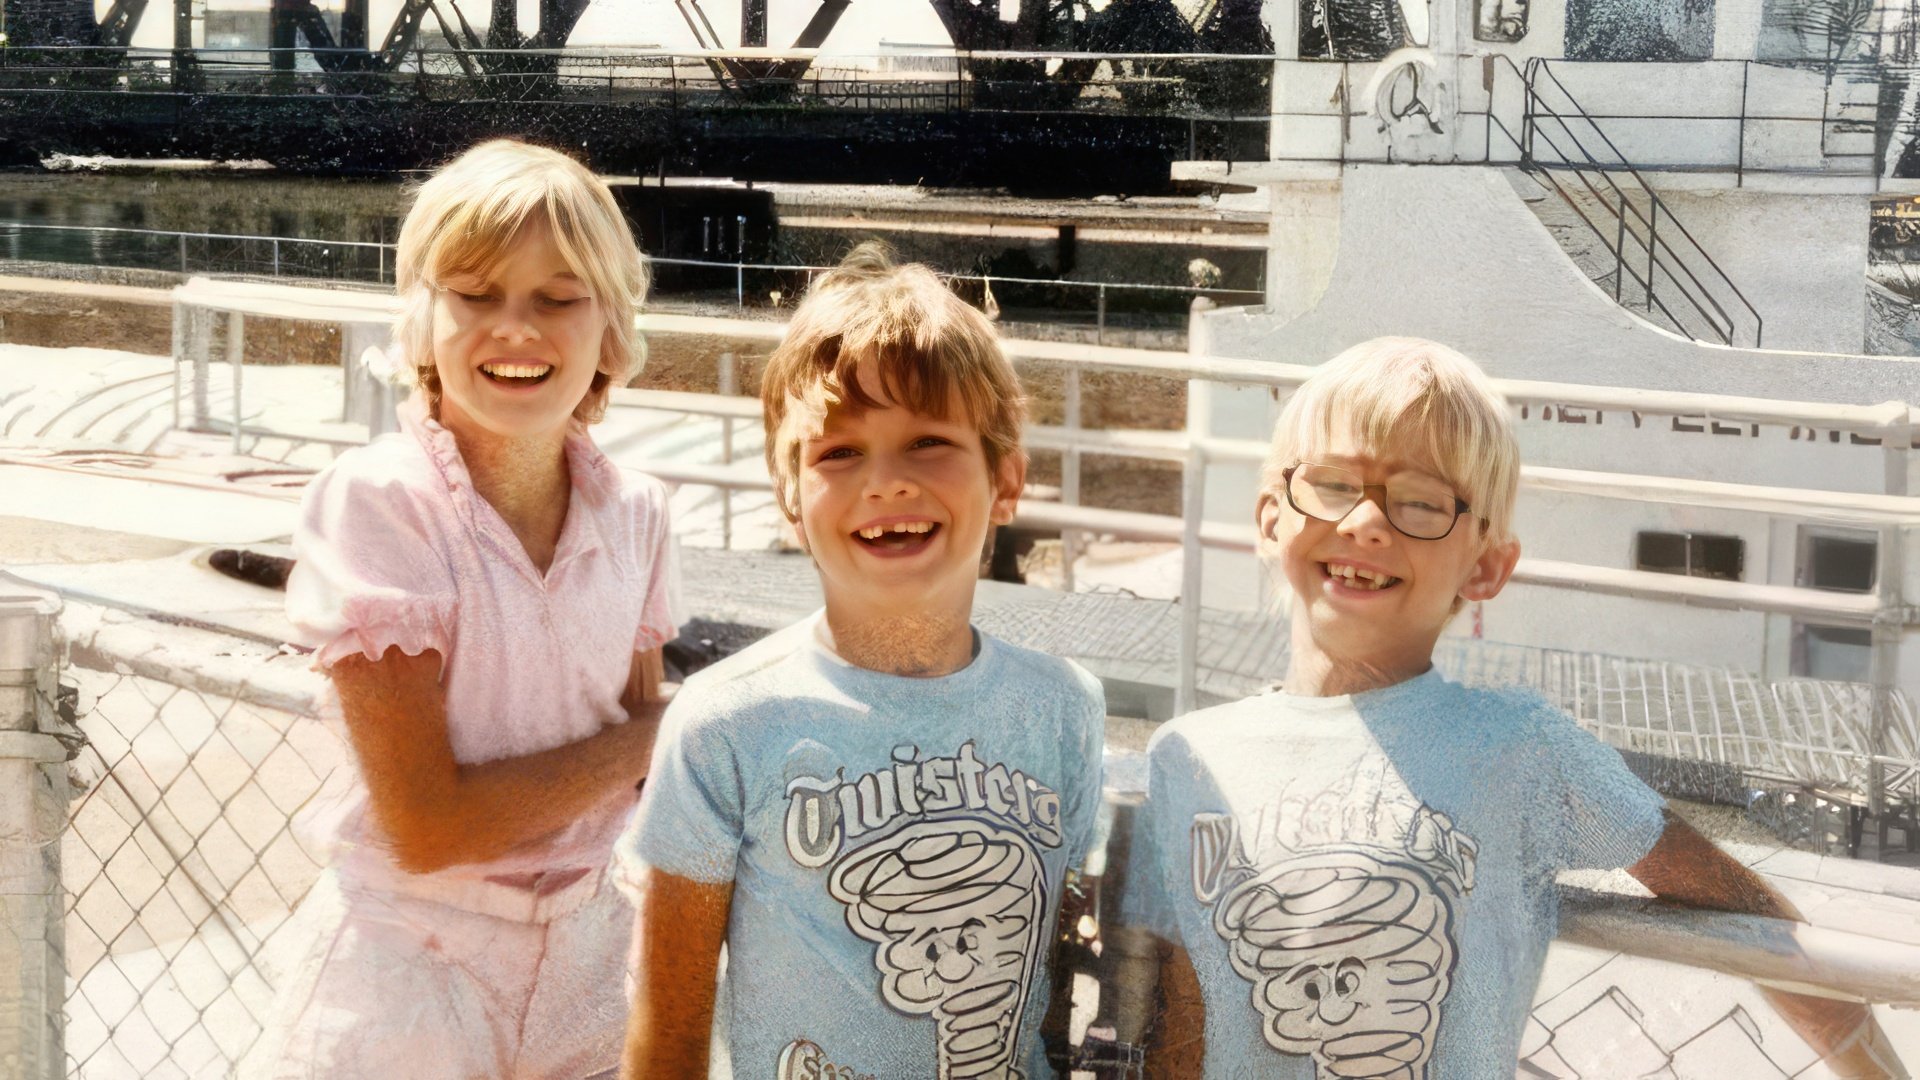 Ashton Kutcher with his brother and sister in their childhood